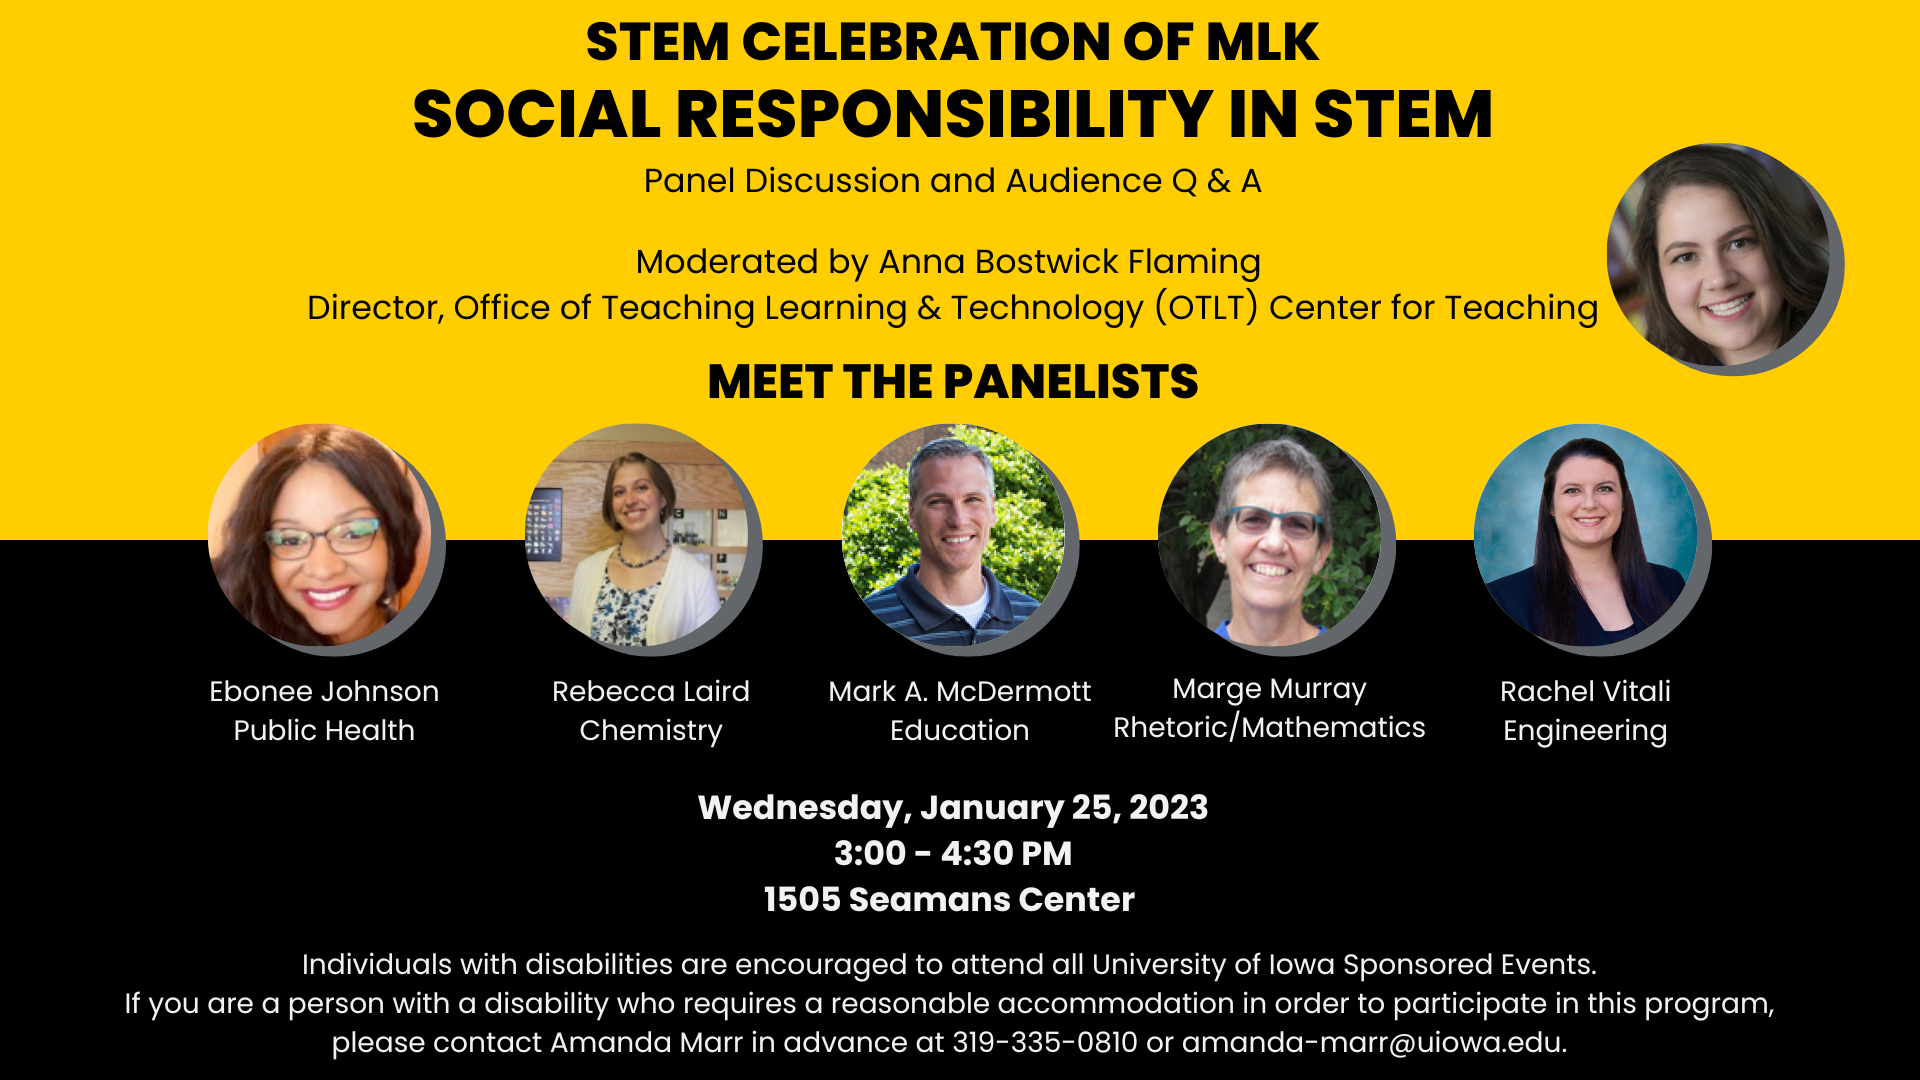 Social Responsibility in STEM Panel Discussion and Audience Q & A Moderated by Anna Bostwick Flaming (Director of the UI Center for Teaching) MEET THE PANELISTS Wednesday, January 25, 2023 3:00 - 4:30 PM 1505 Seamans Center Mark A. McDermott Education Reb